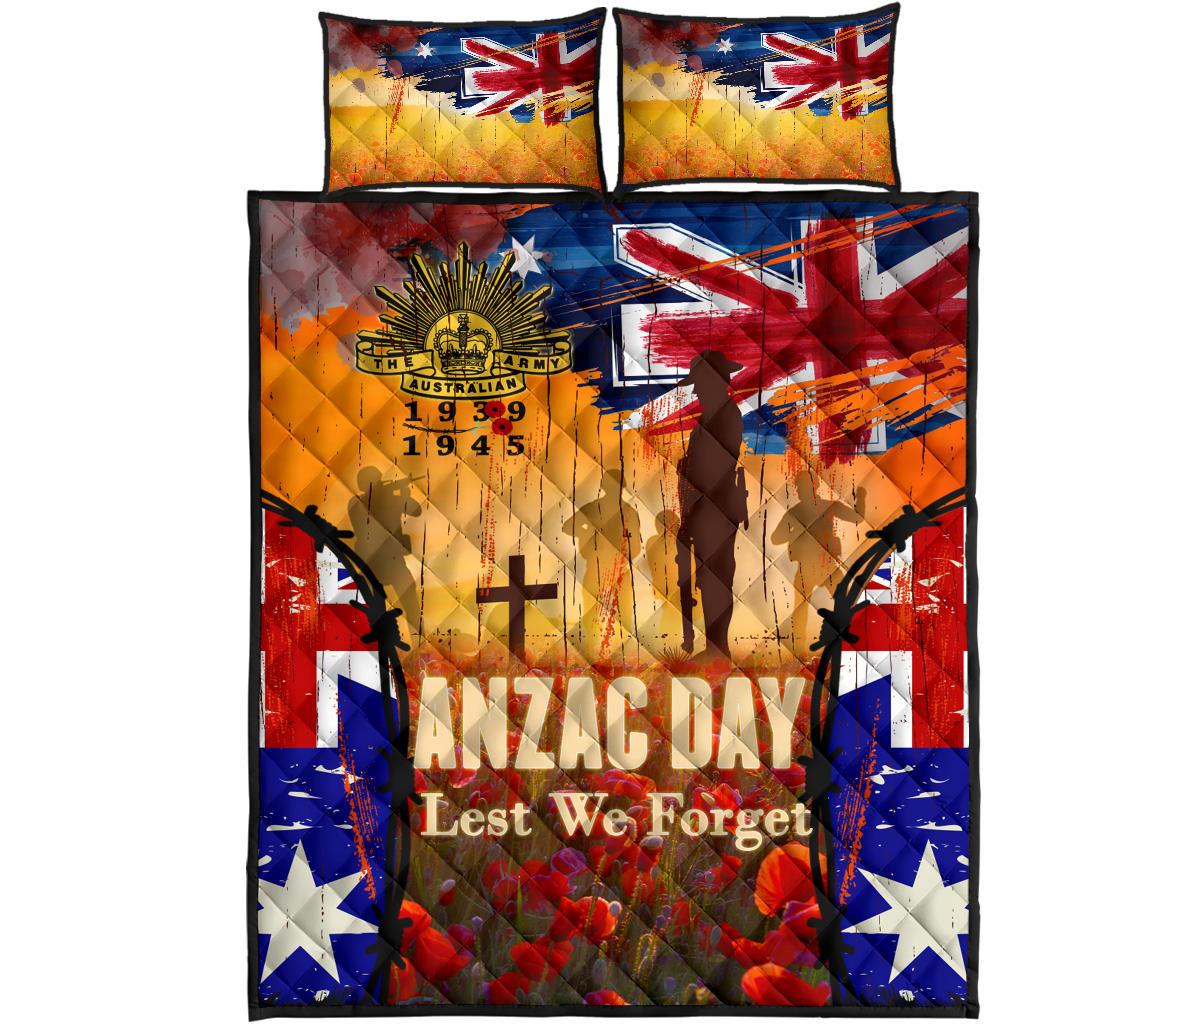 australia-anzac-day-2021-quilt-bed-set-anzac-day-commemoration-1939-1945